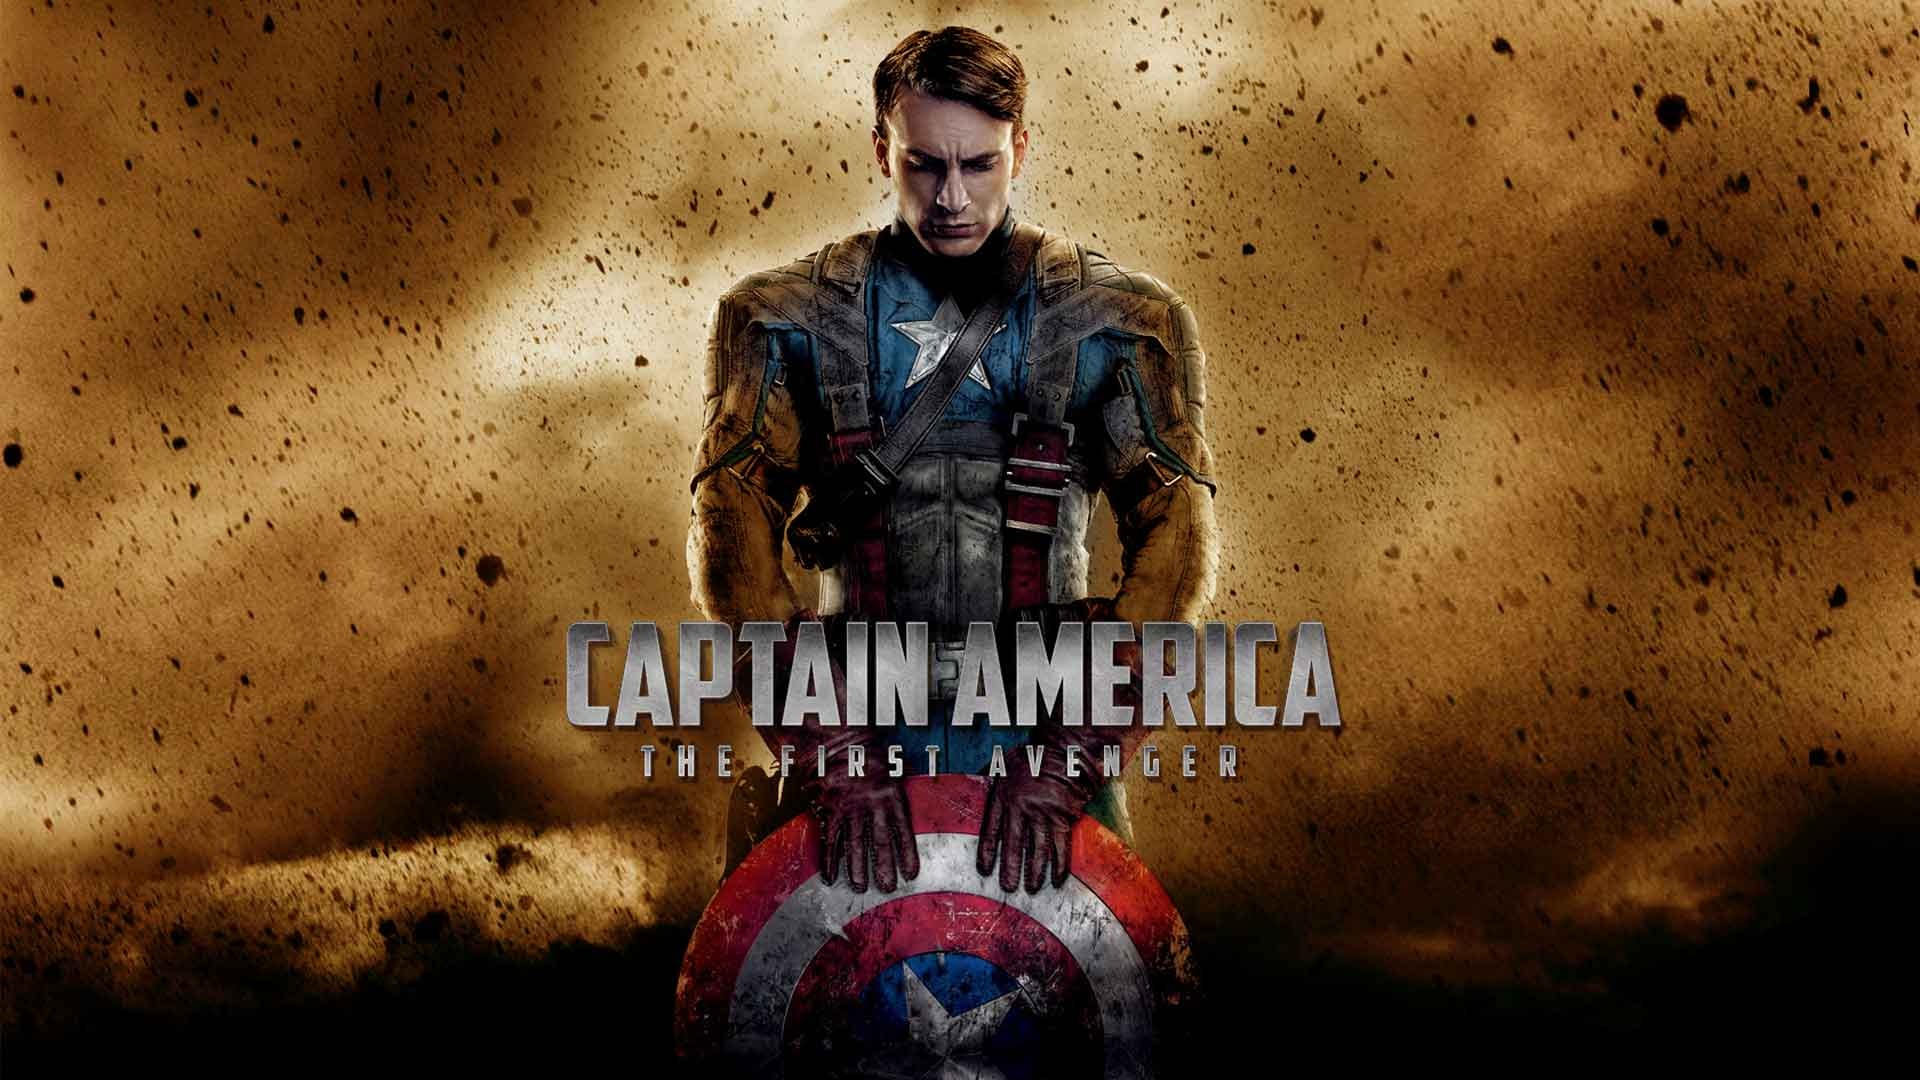 Captain America: The First Avenger wallpapers HD #7 - 1920x1080